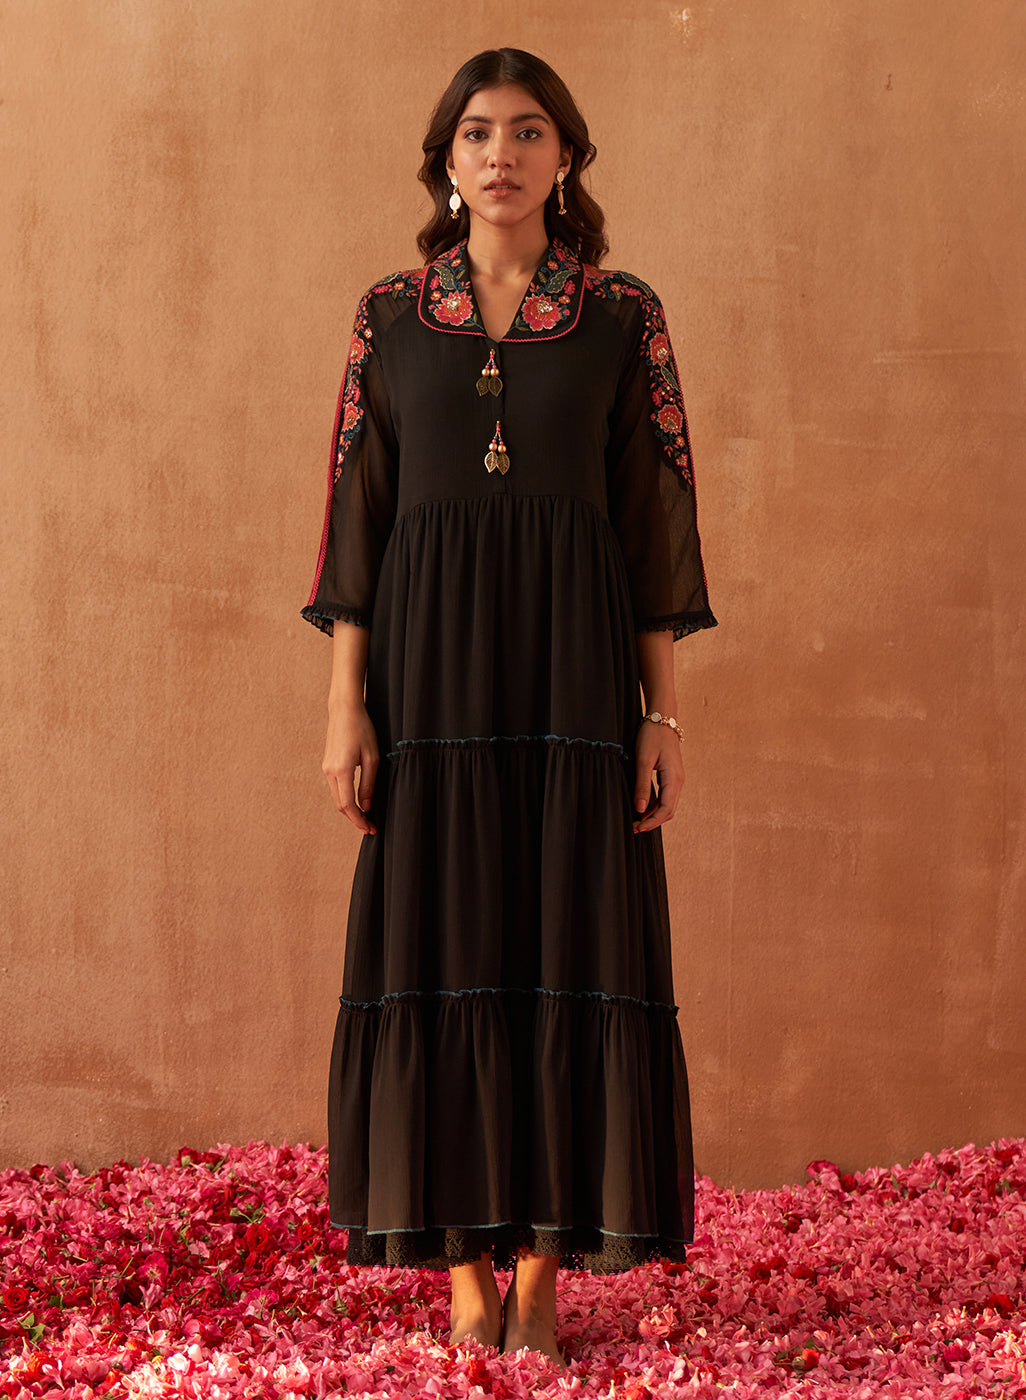 Black Frill Dress With Delicate Embroidery